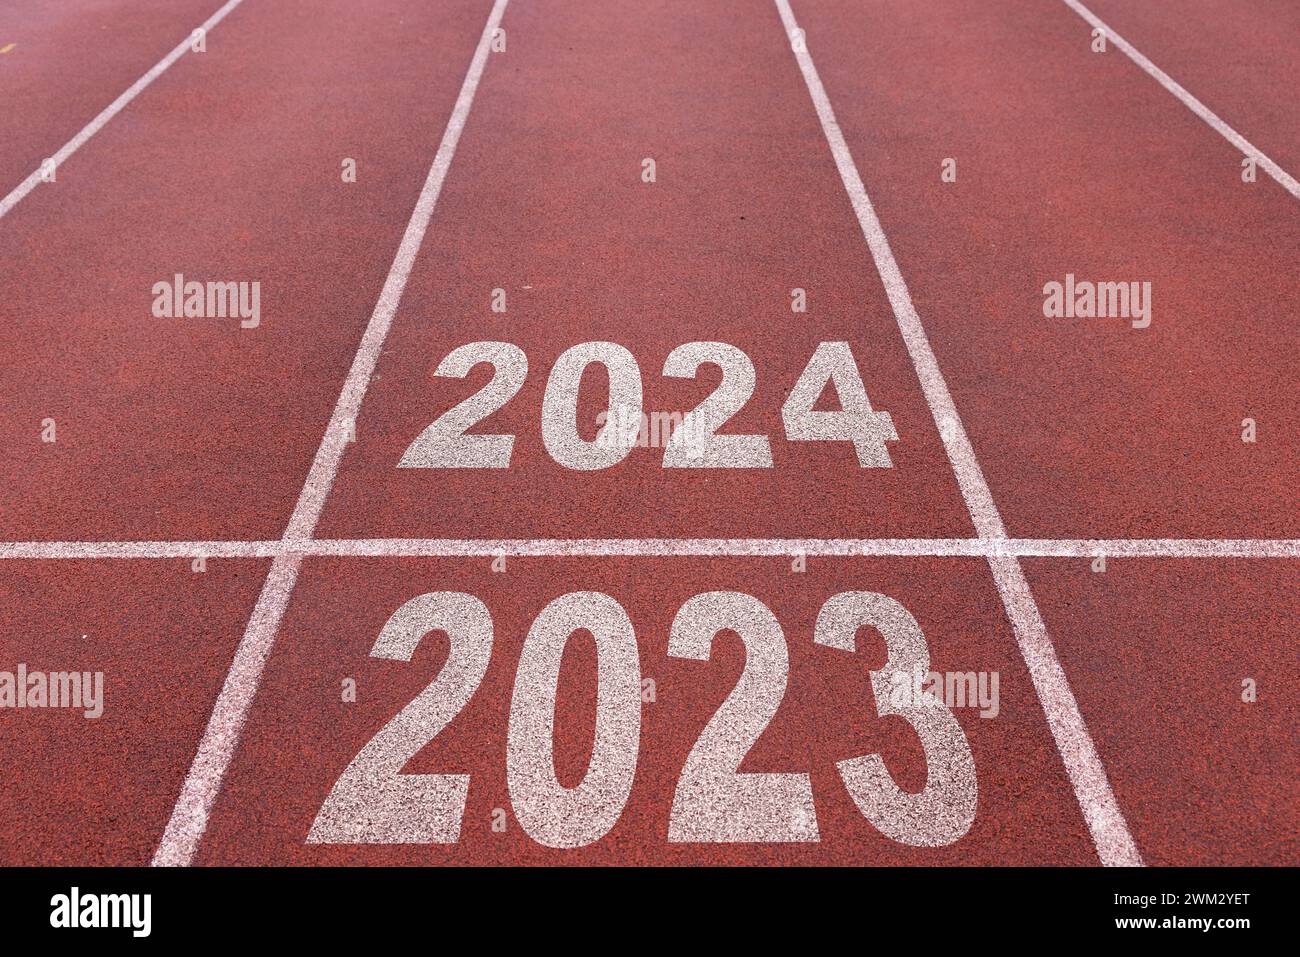 Happy new year 2024 symbolizes the start of the new year. Rear view of a man preparing to run on the athletics track engraved with the year 2024. Stock Photo